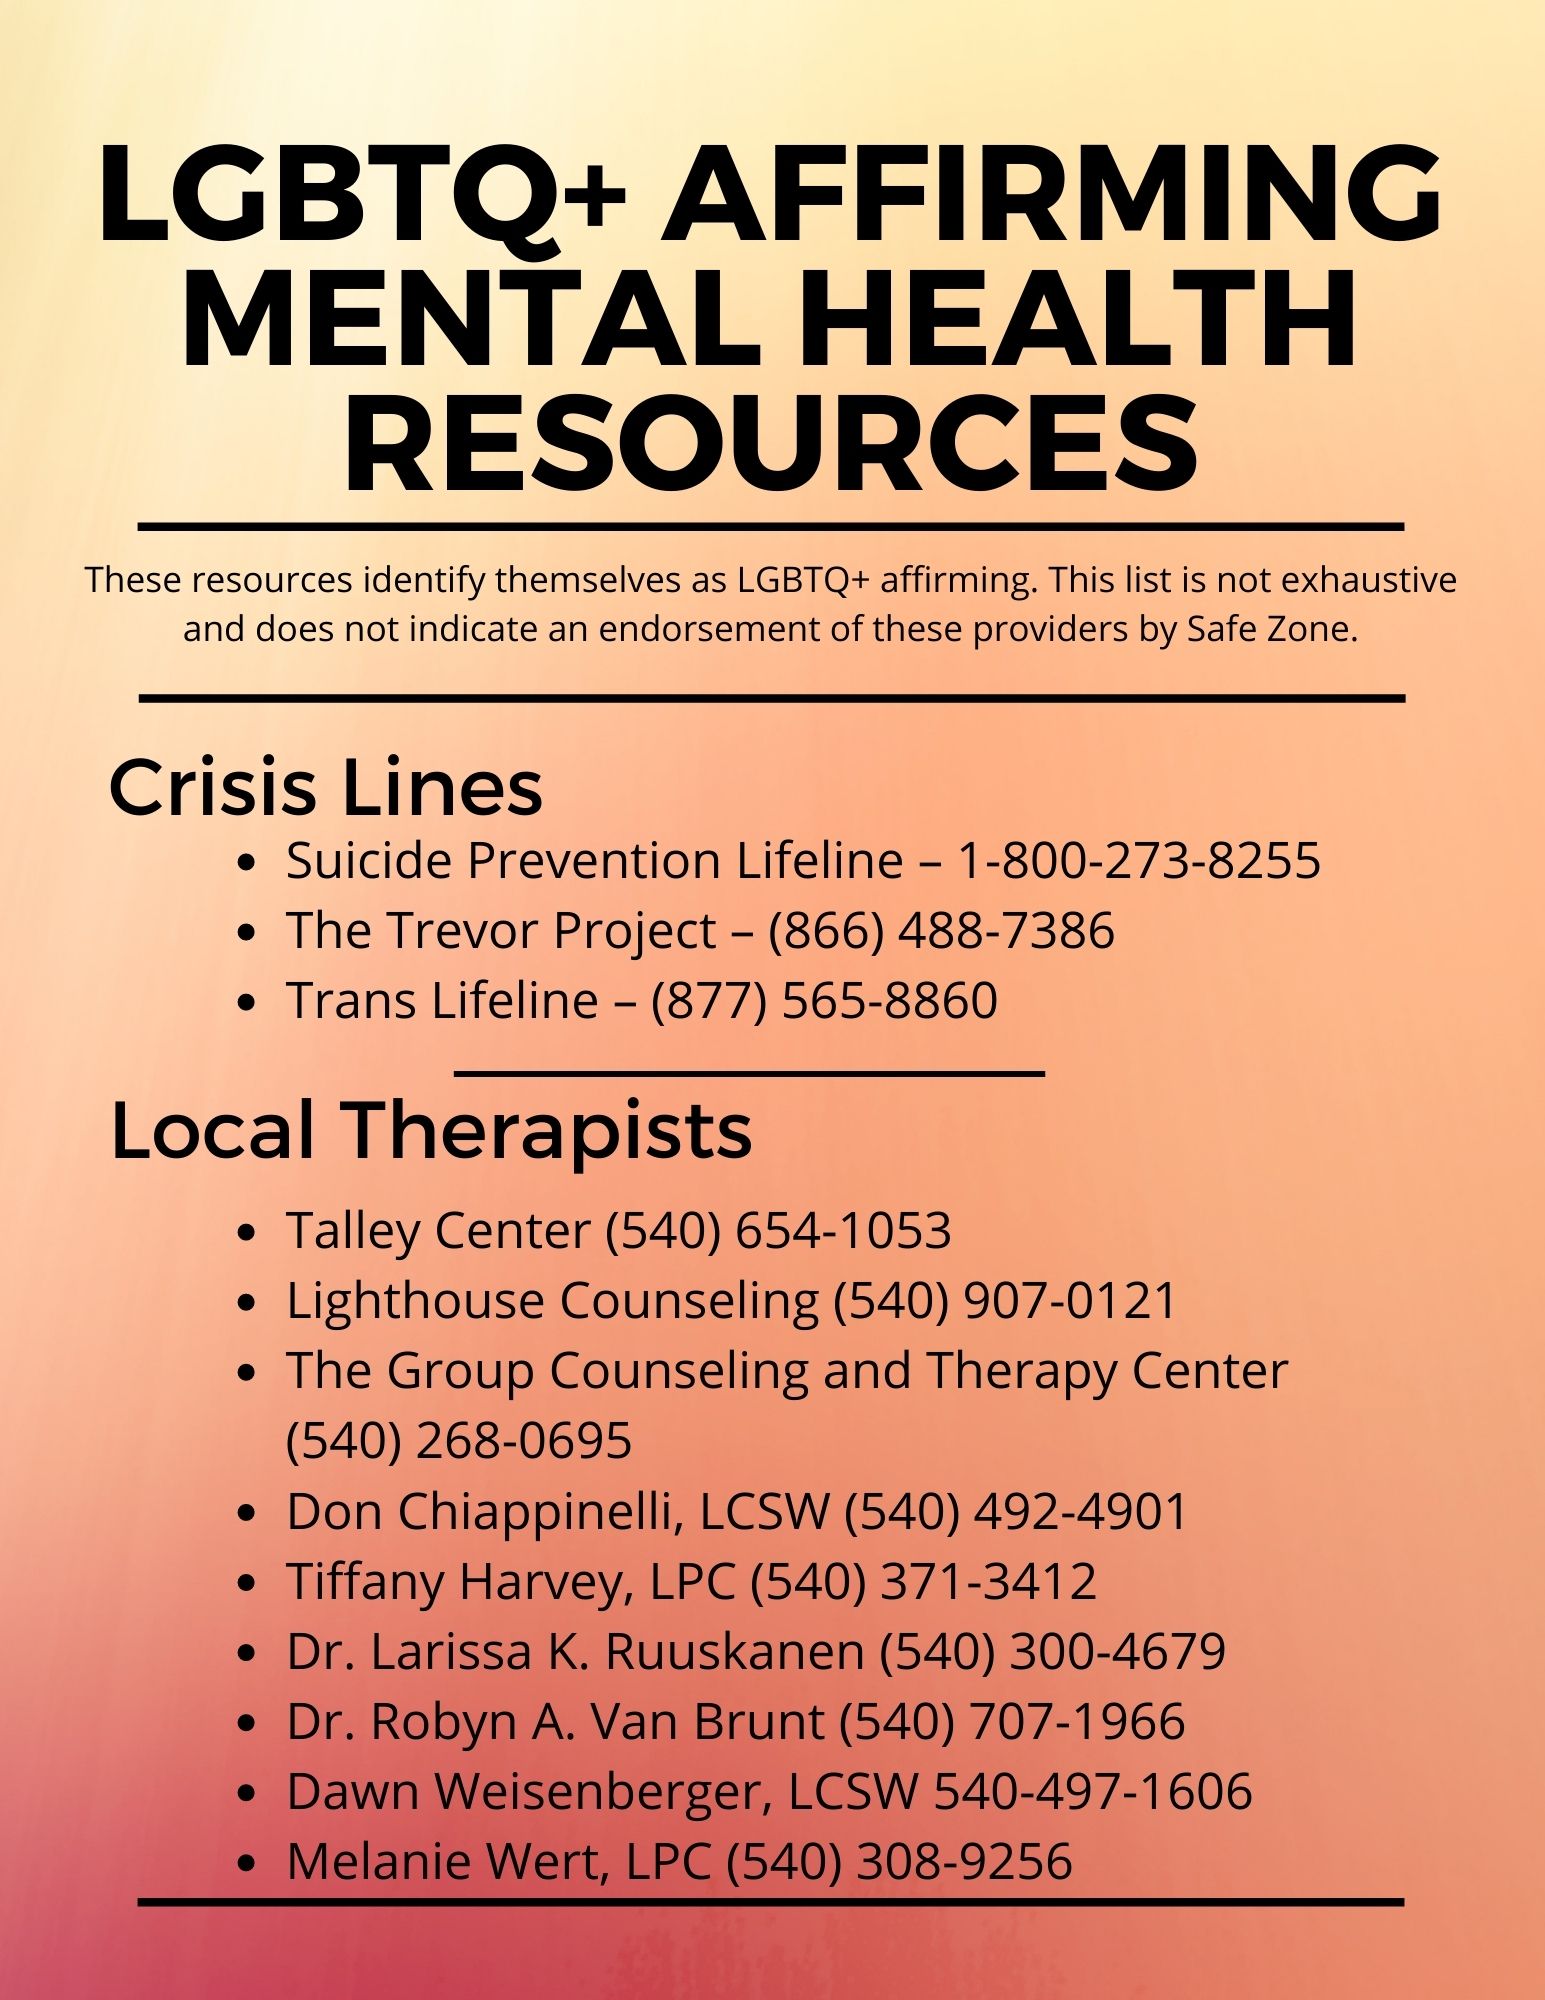 LGBTQ+ Affirming Mental Health Resources - These resources identify themselves as LGBTQ+ affirming. This list is not exhaustive and does not indicate an endorsement of these providers by Safe Zone. Crisis Lines: Suicide Prevention Lifeline - 1-800-273-8255; The Trevor Project -866-488-7386; Trans Lifeline - 877-565-8860; Local Therapists: Talley Center - 540-654-1053; Lighthouse Counseling - 540-907-0121; The Group Counseling and Therapy Center - 540-268-0695; Don Chiappinelli, LCSW - 540-492-4901; Tiffany Harvey LPC - 540-371-3421; Dr. Larissa Ruuskanen - 540-300-4679; Dr. Robyn A. Van Brunt - 540-707-1966; Dawn Weisenberger, LCSW - 540-497-1606; Melanie Wert, LPC 540-308-9256